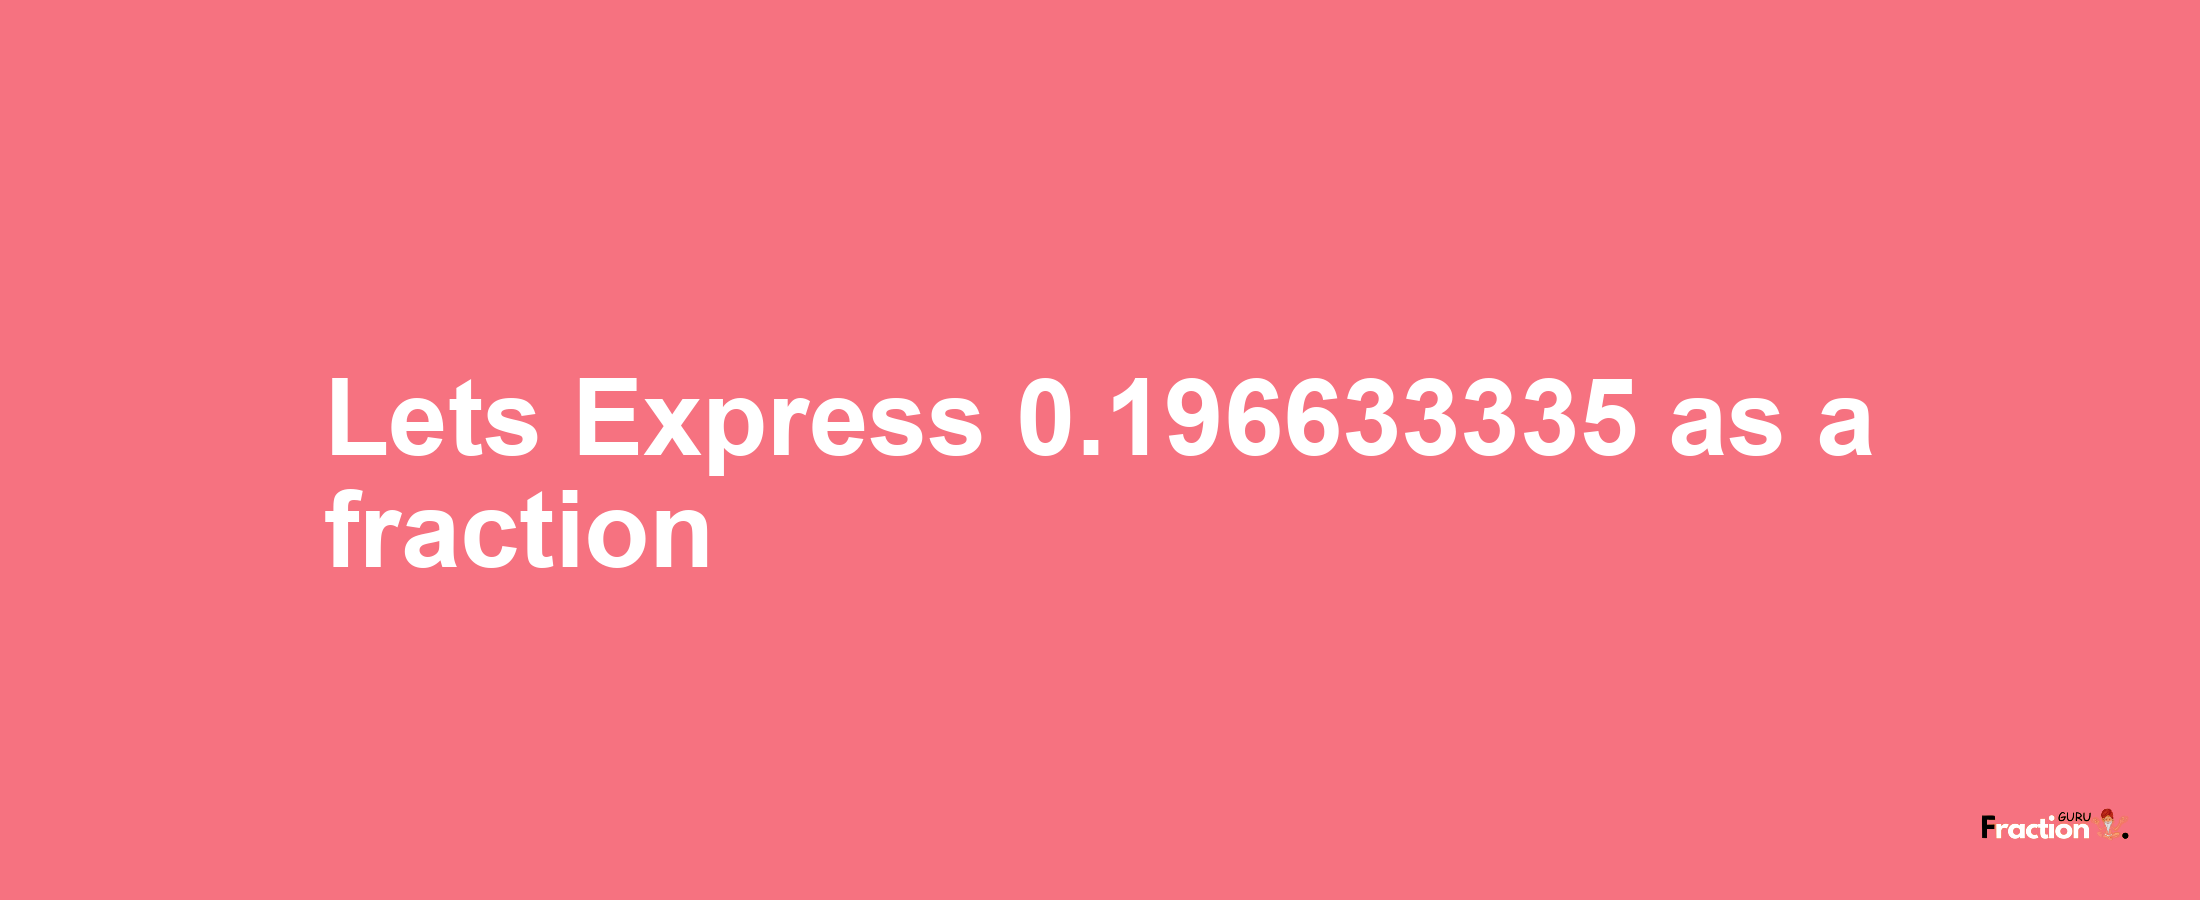 Lets Express 0.196633335 as afraction